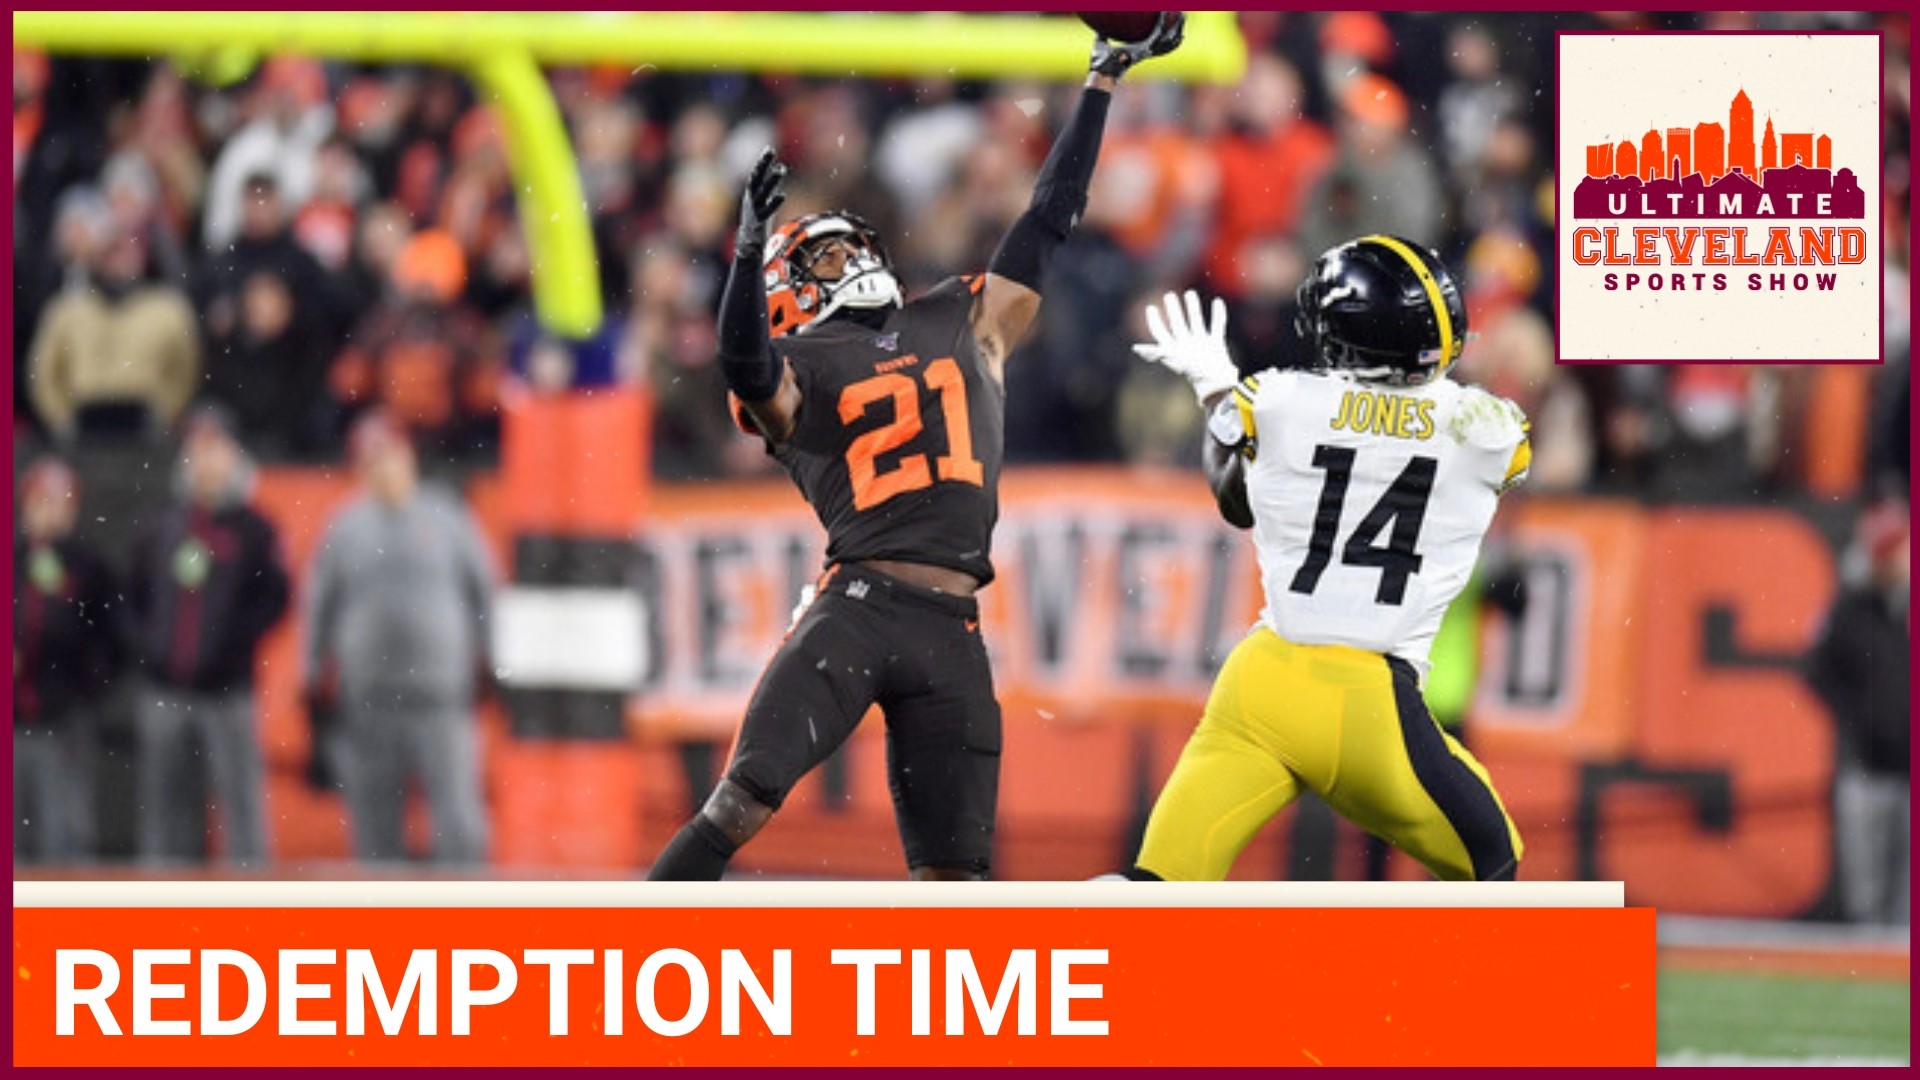 Can the Cleveland Browns redeem themselves under the lights vs. the Steelers after last weeks debacle?